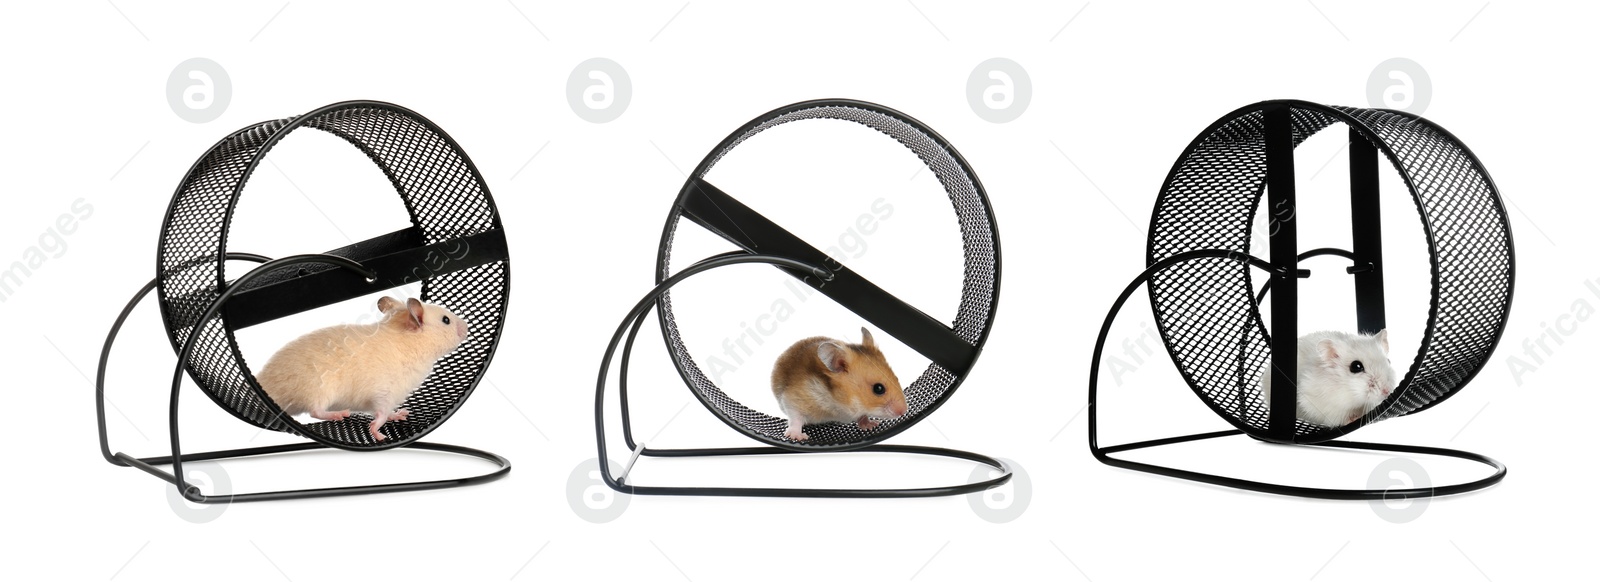 Image of Cute funny hamsters running in wheels on white background, collage. Banner design